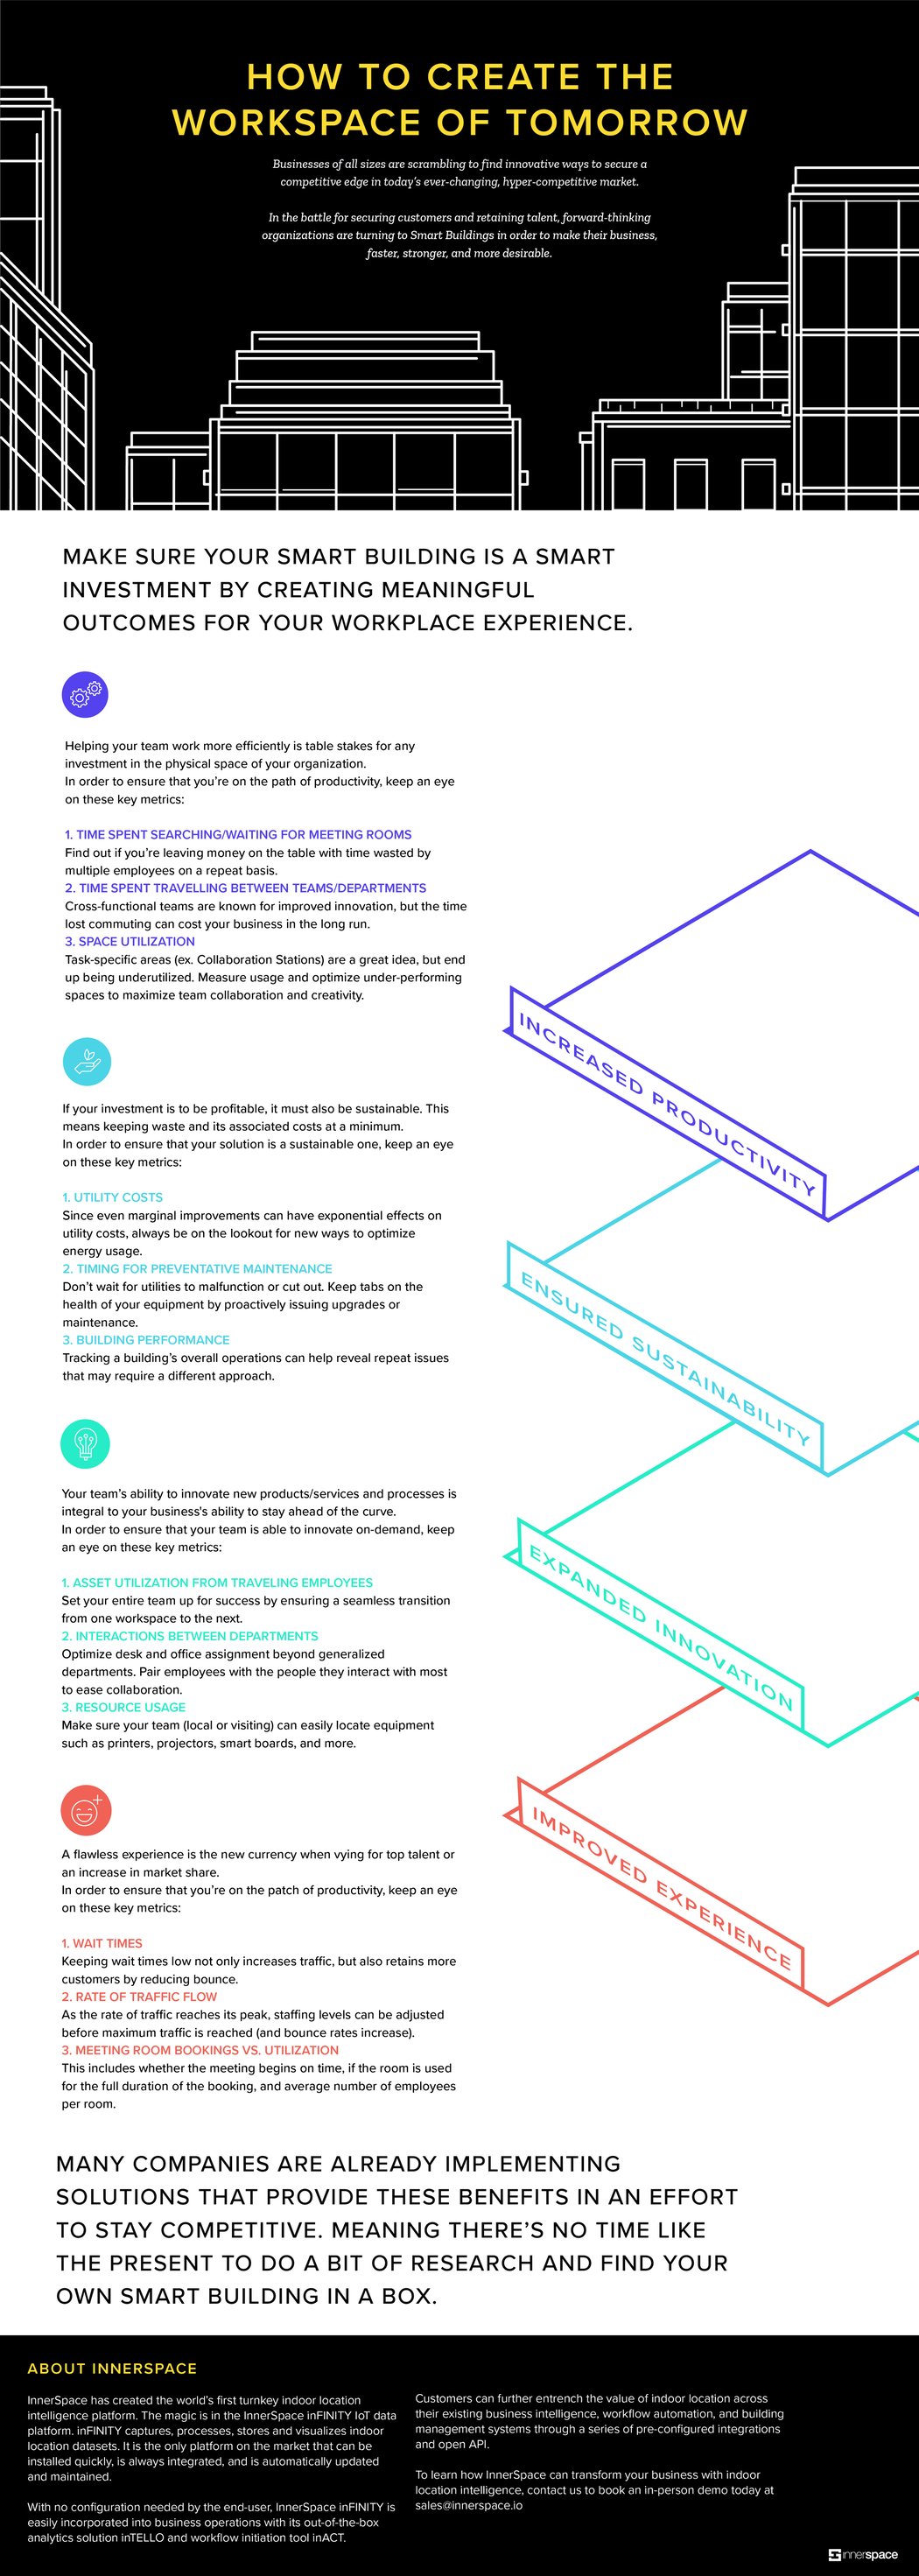 InnerSpace-How To Create The Workspace of Tomorrow_Infographic